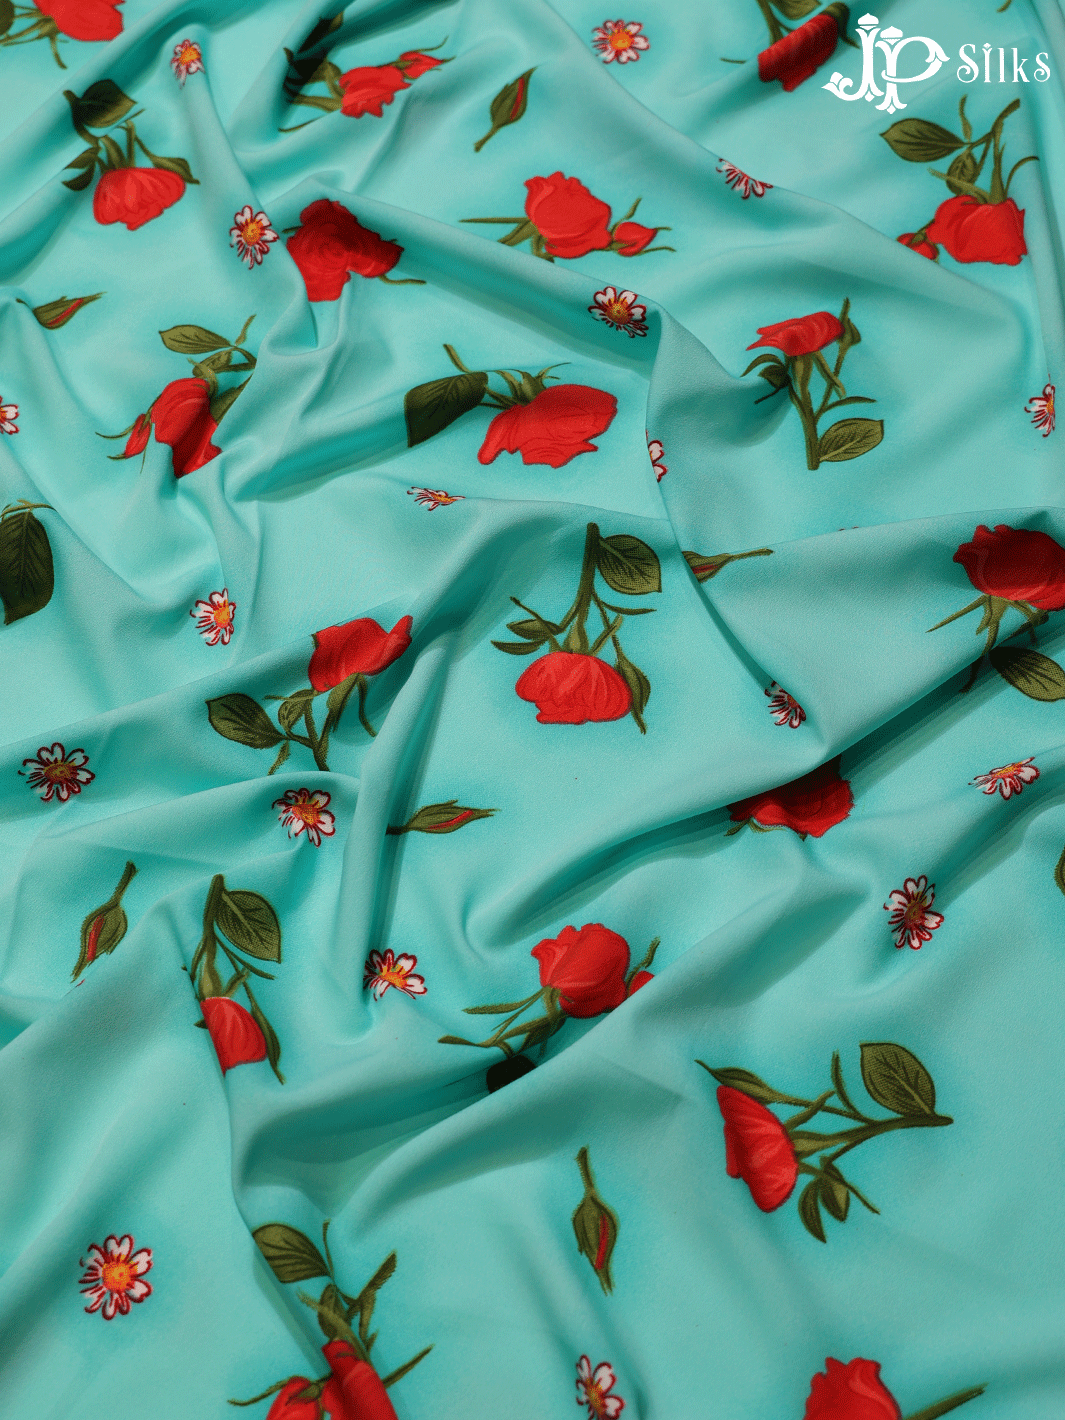 Teal Blue , Red and Green Digital Printed Chiffon Fabric - A14345